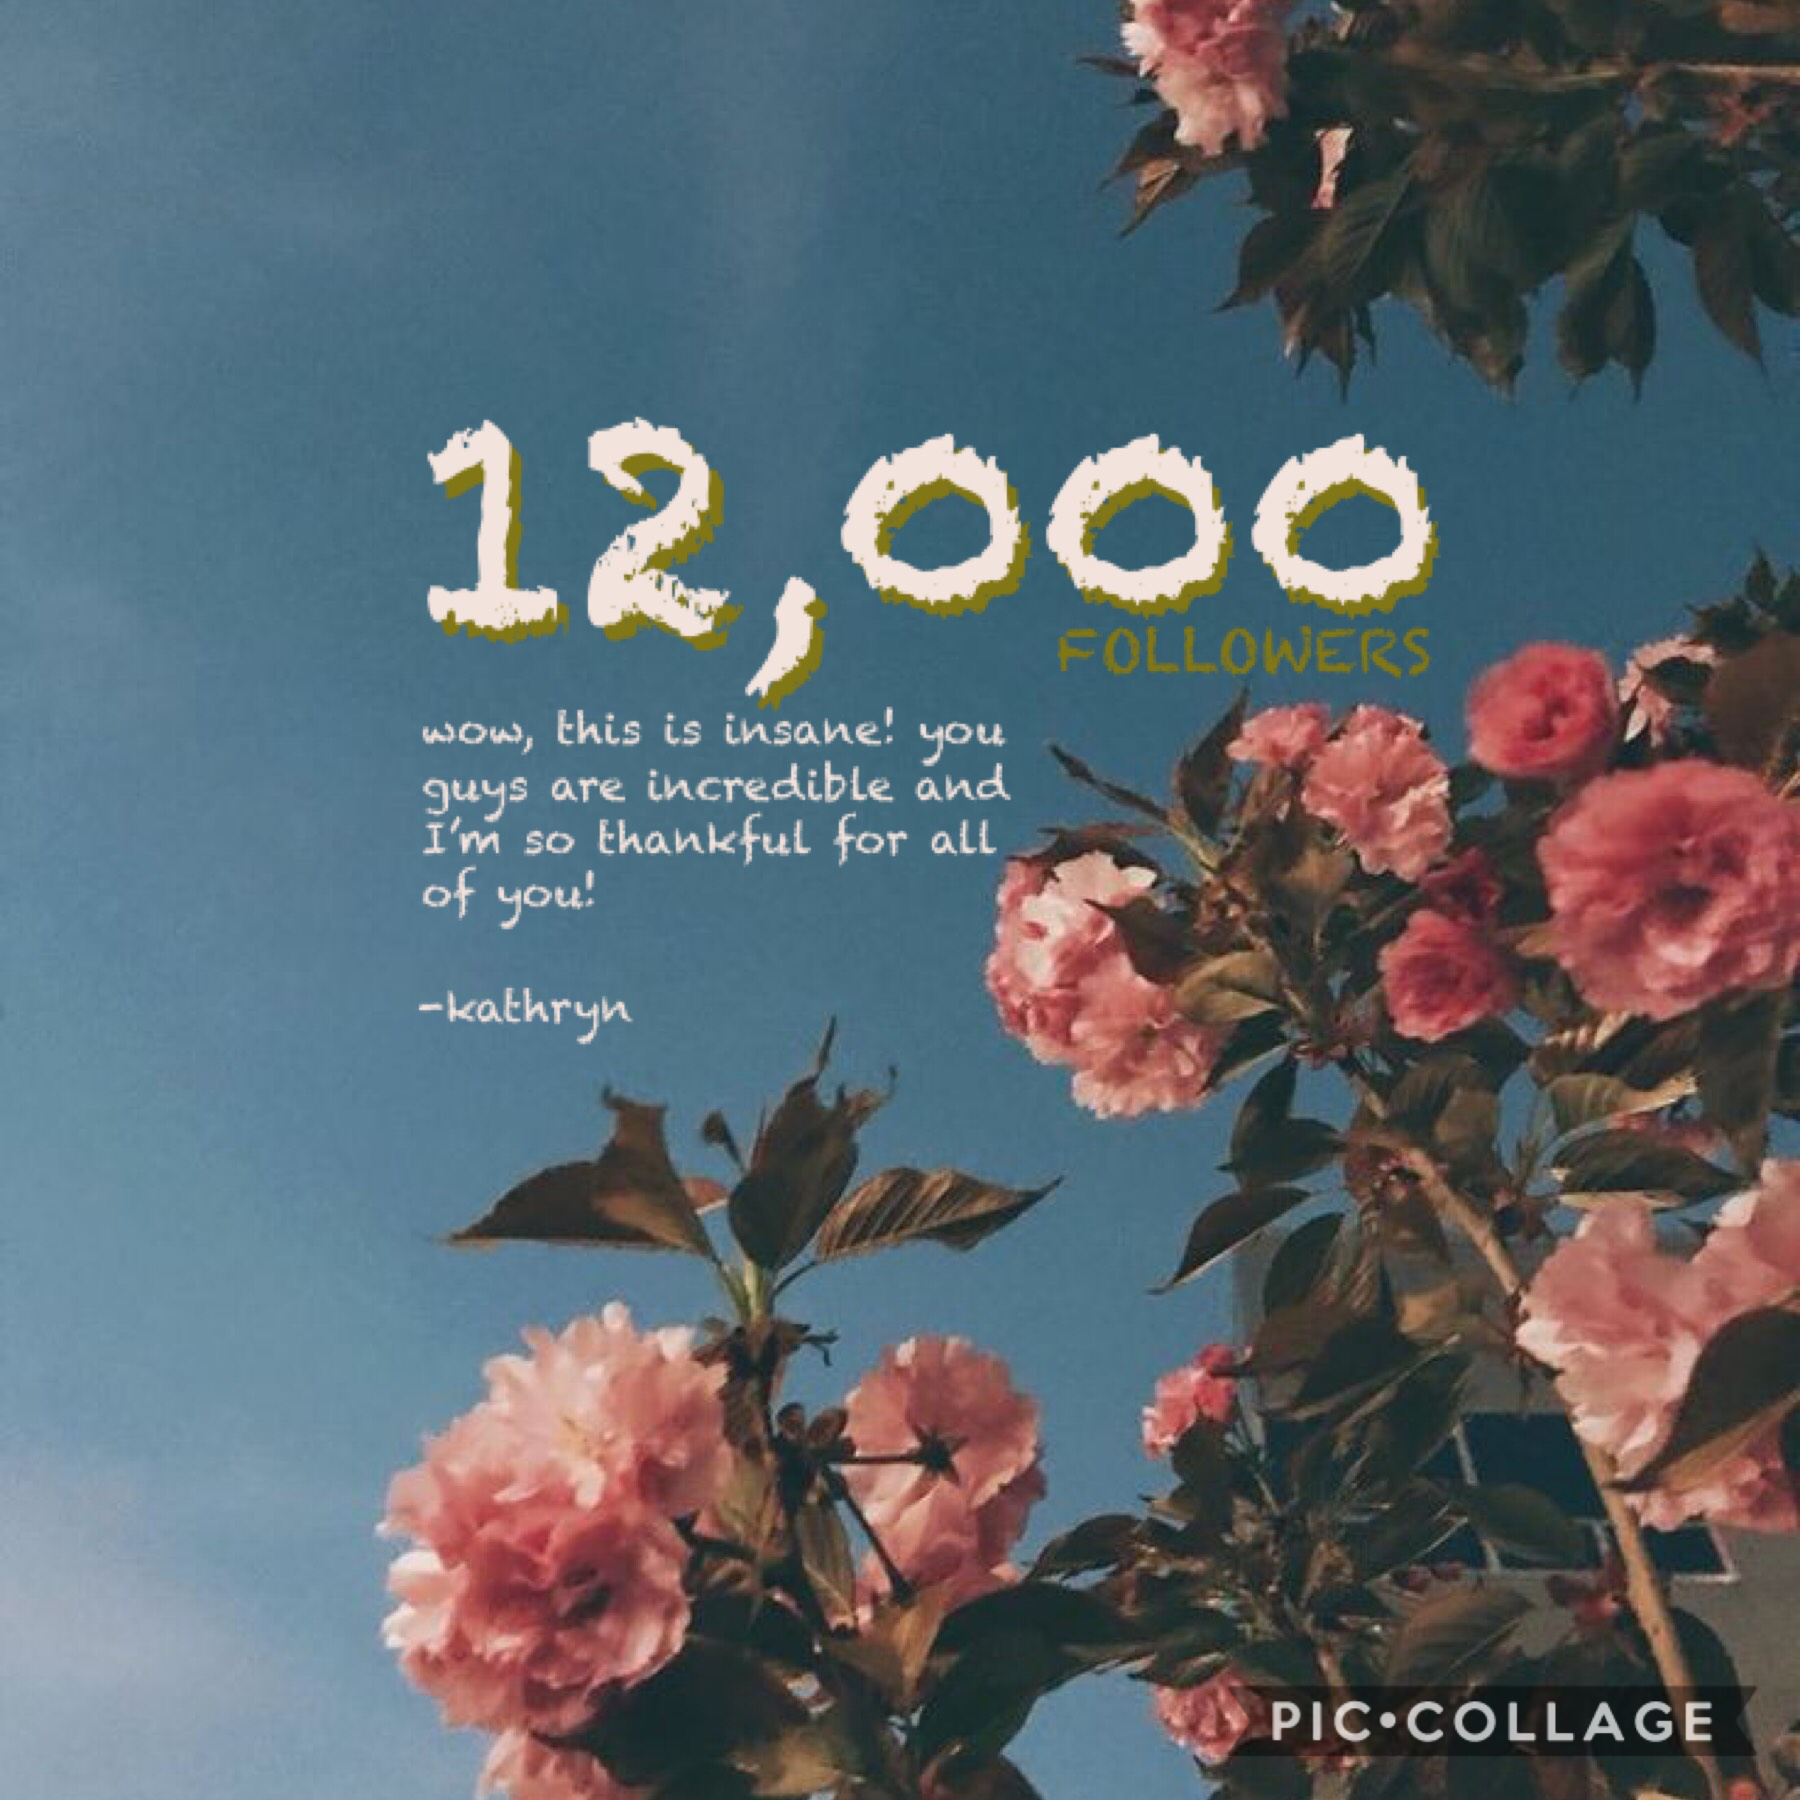 you know what’s crazy? my old account had 13,000 followers when it got deleted. I’m almost back to where I was, something I never thought would happen. 🌿 thank you all so much. ✨♥️